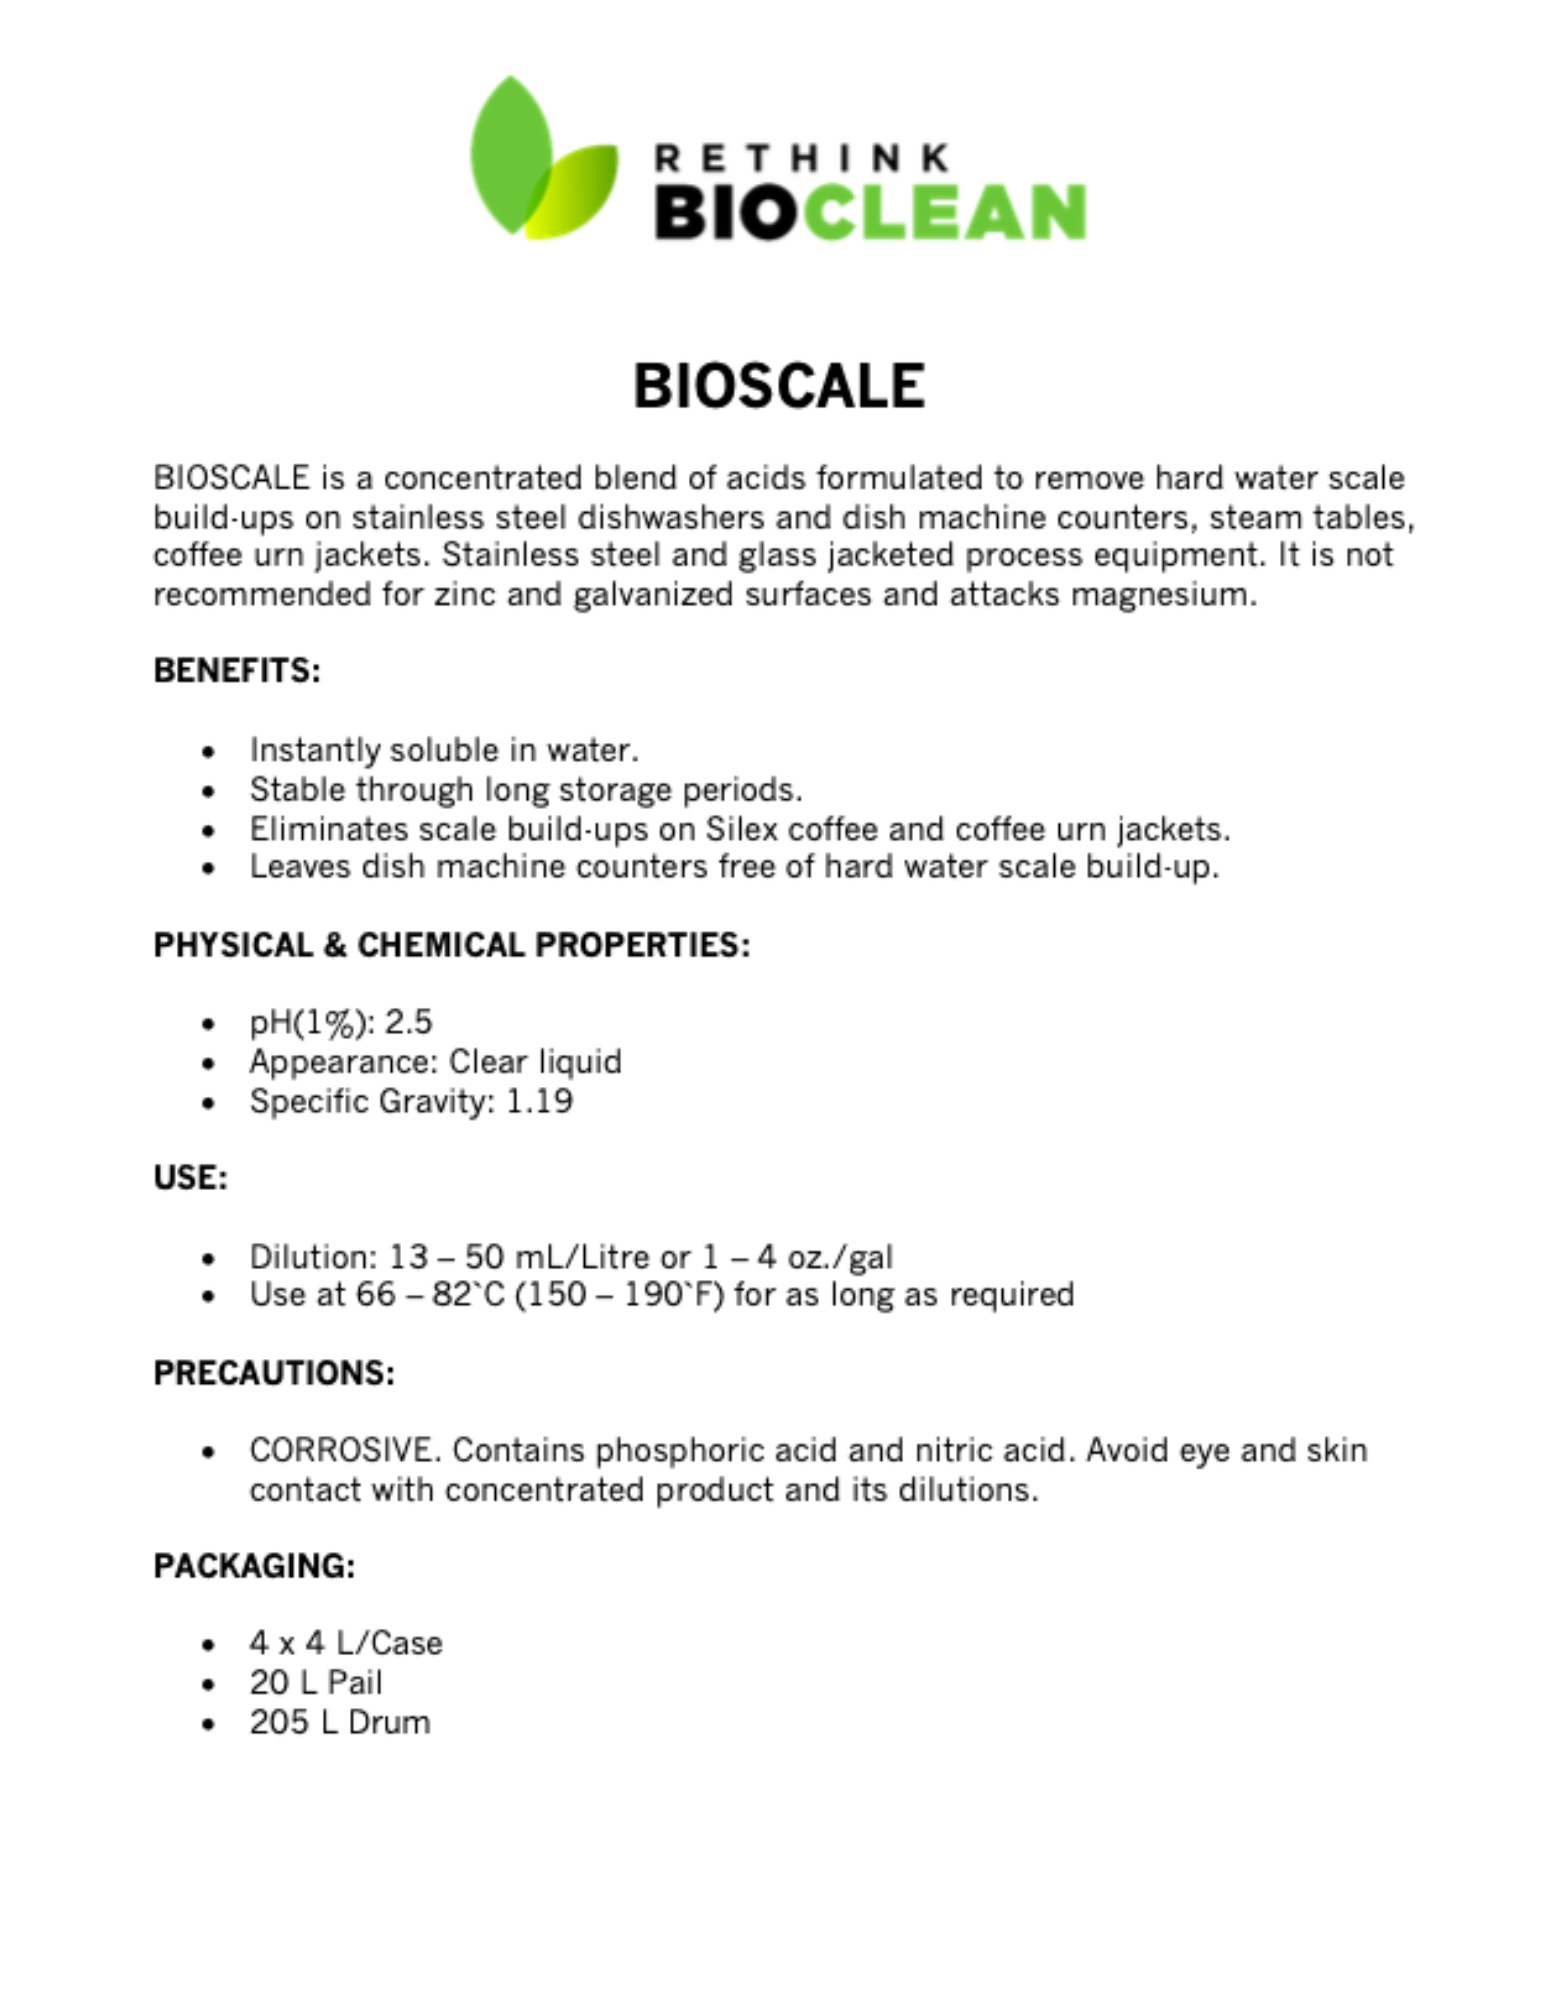 Safety Data Sheet from ReThink BioClean for Bioscale.